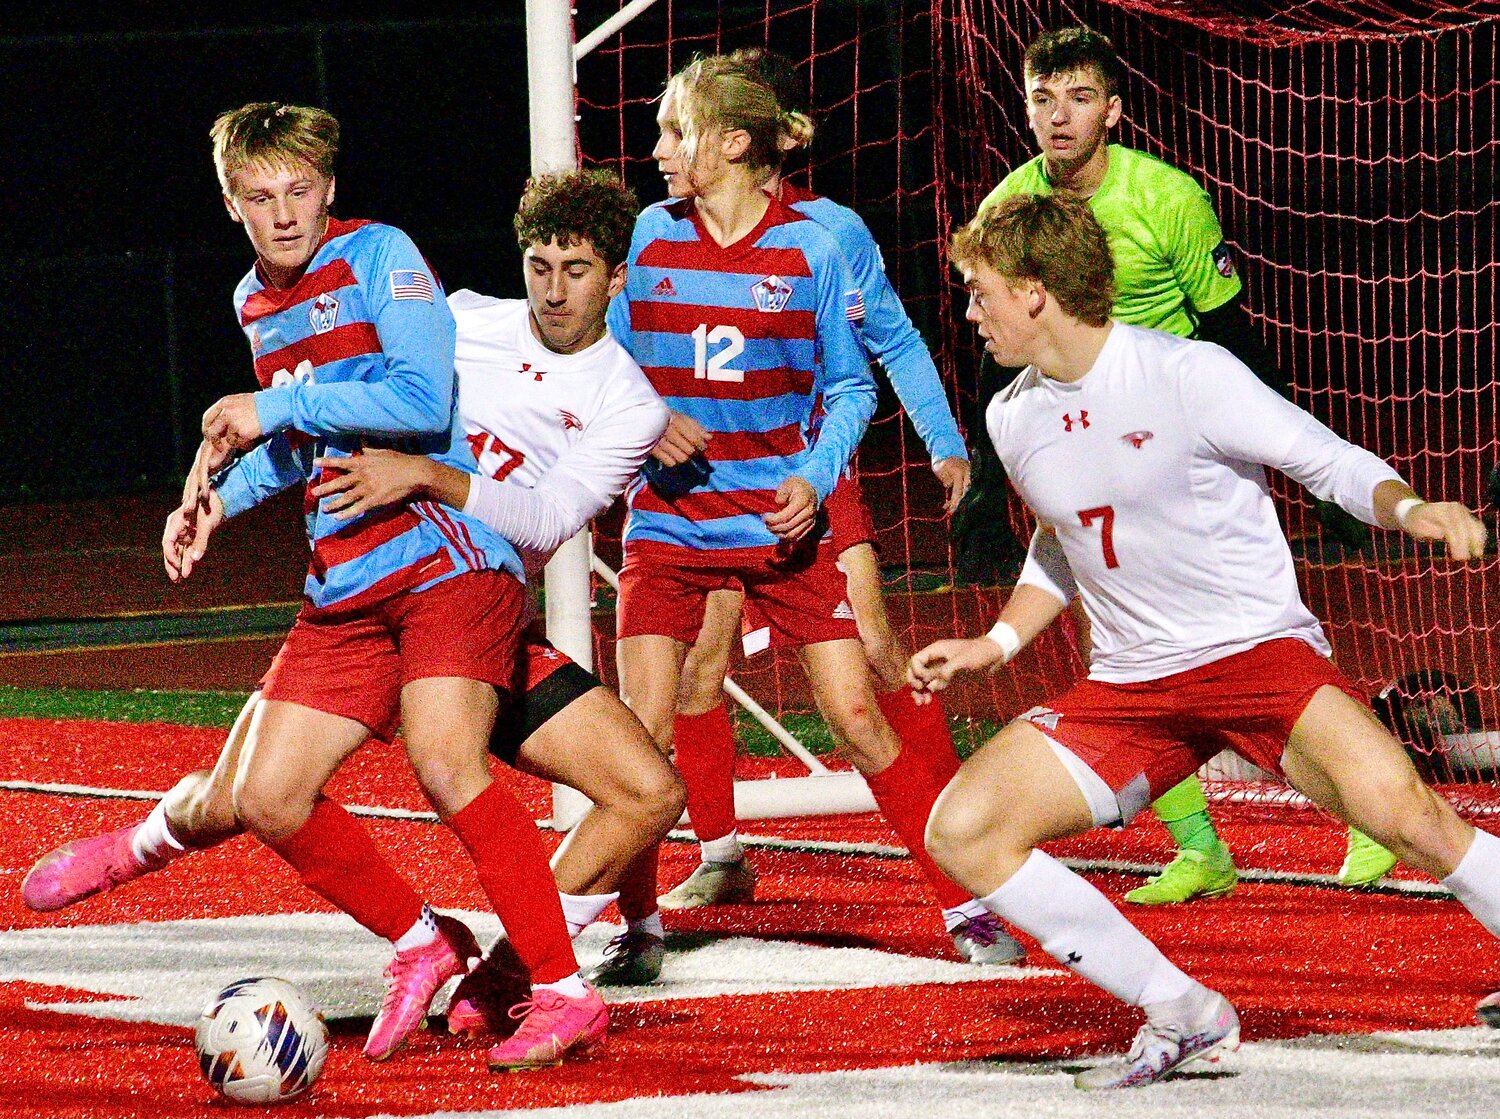 NIXA'S JAYDEN TATE tries to find room around a Glendale player in the penalty box Thursday.